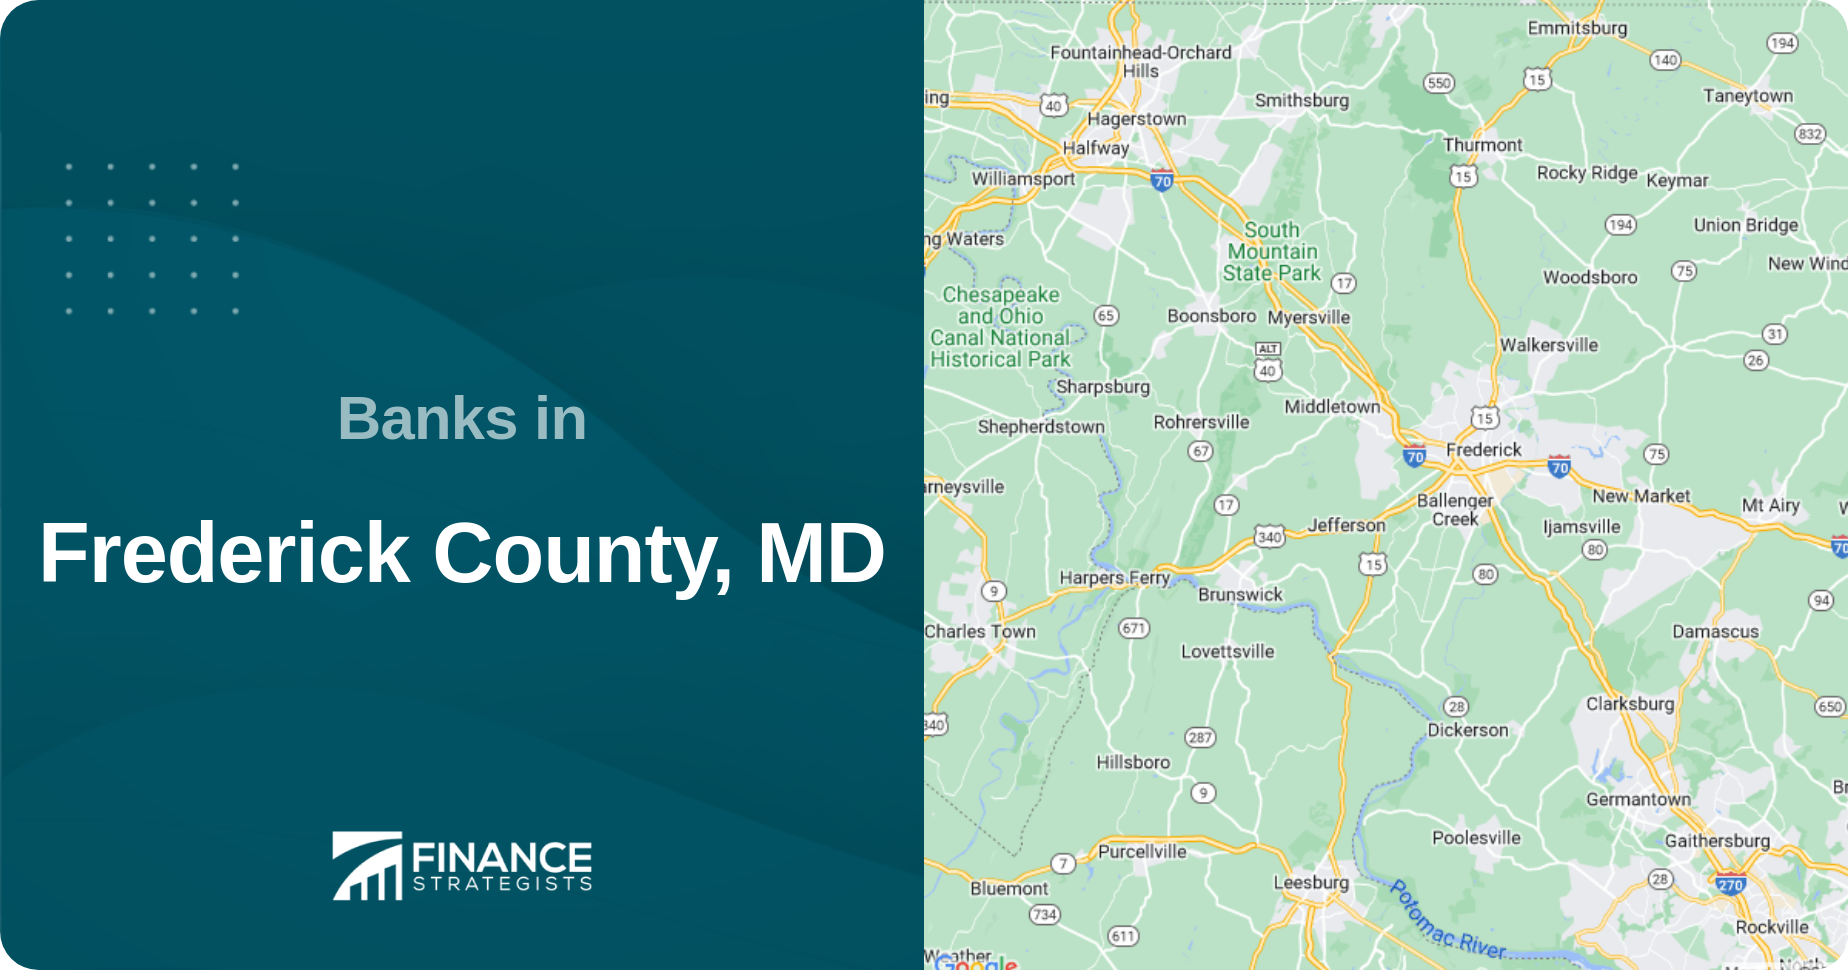 Banks in Frederick County, MD